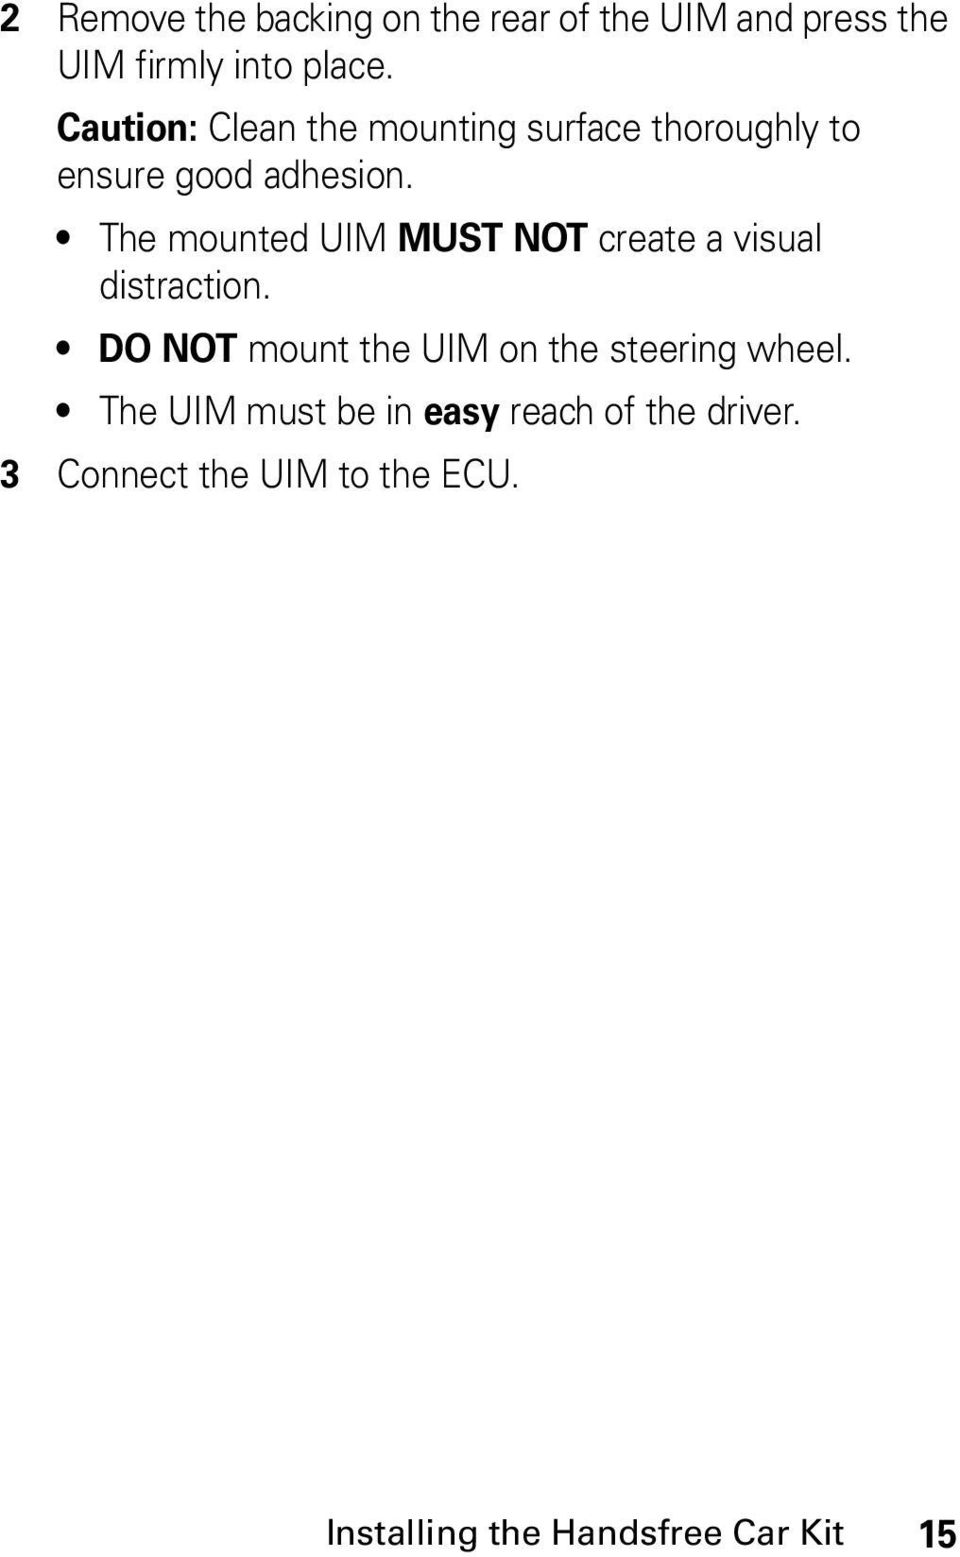 The mounted UIM MUST NOT create a visual distraction.